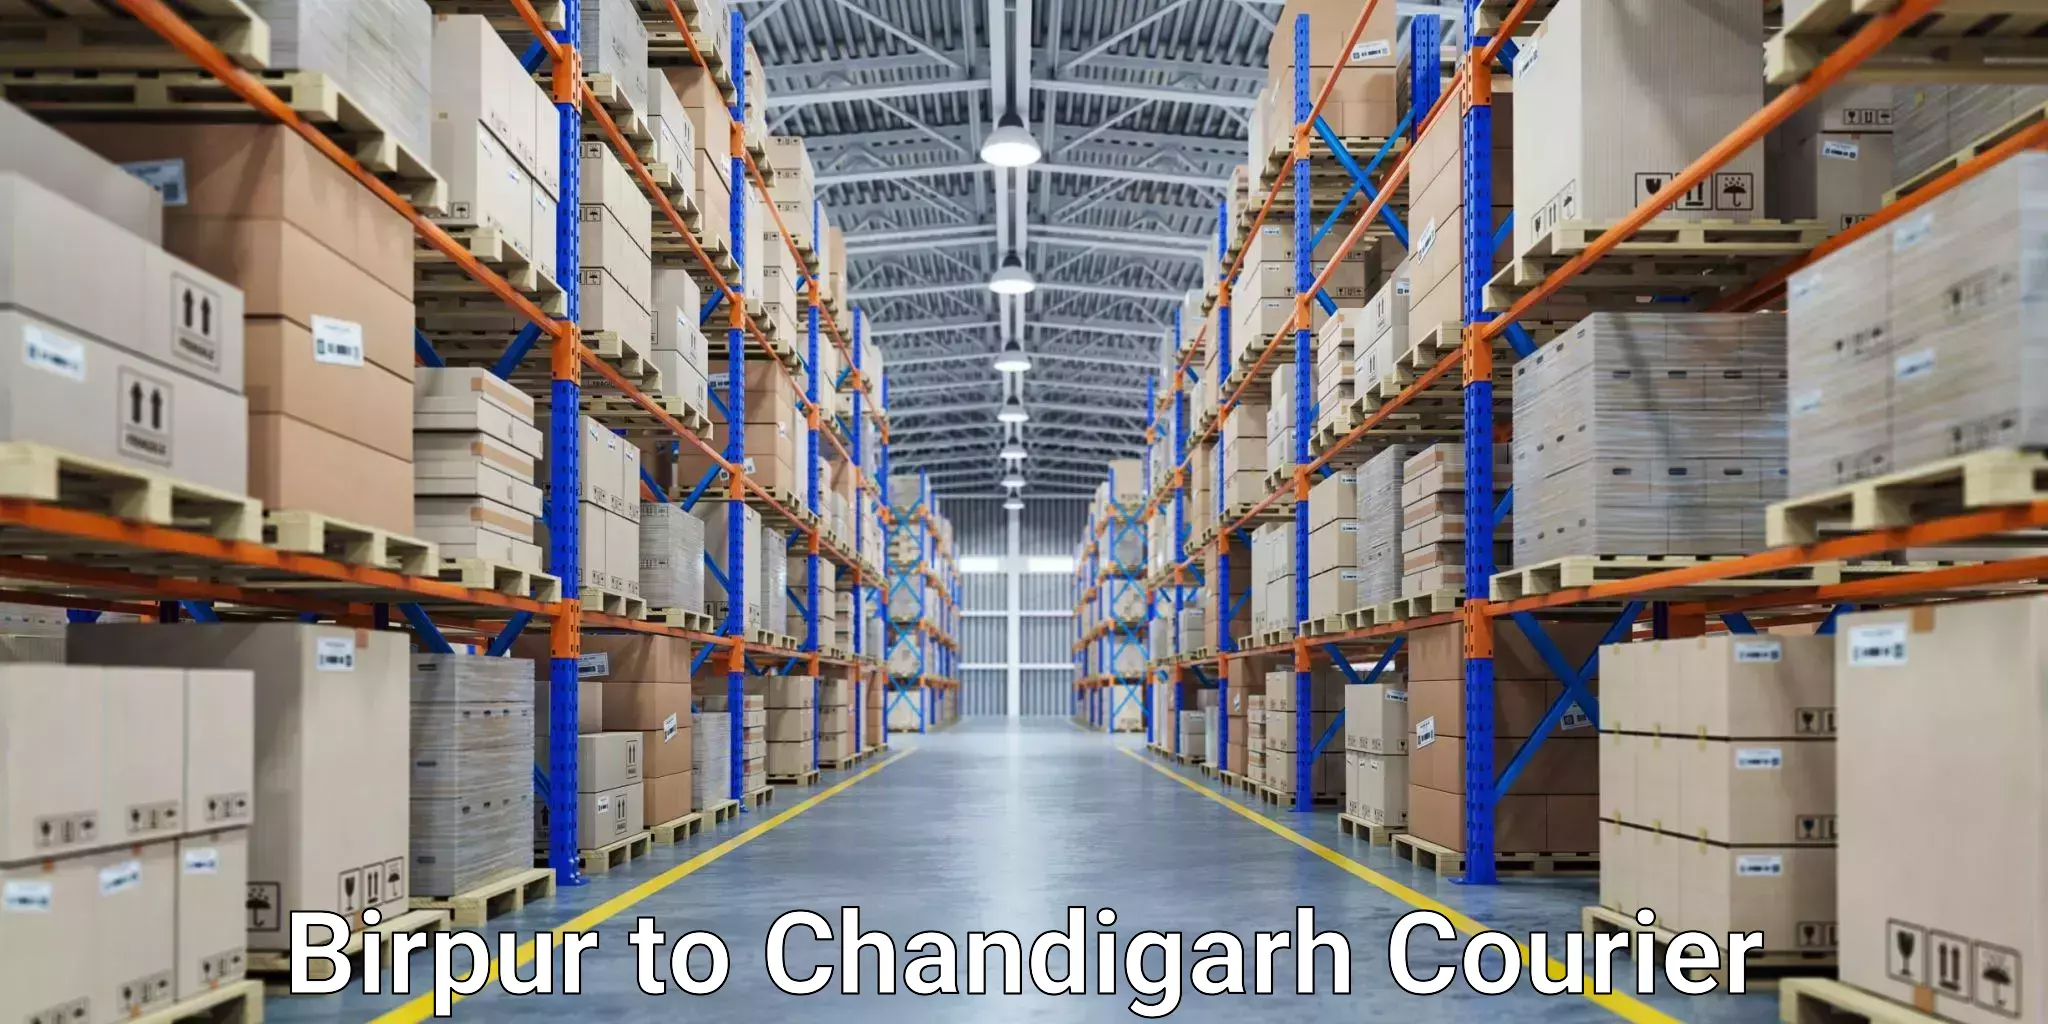 Global freight services Birpur to Chandigarh